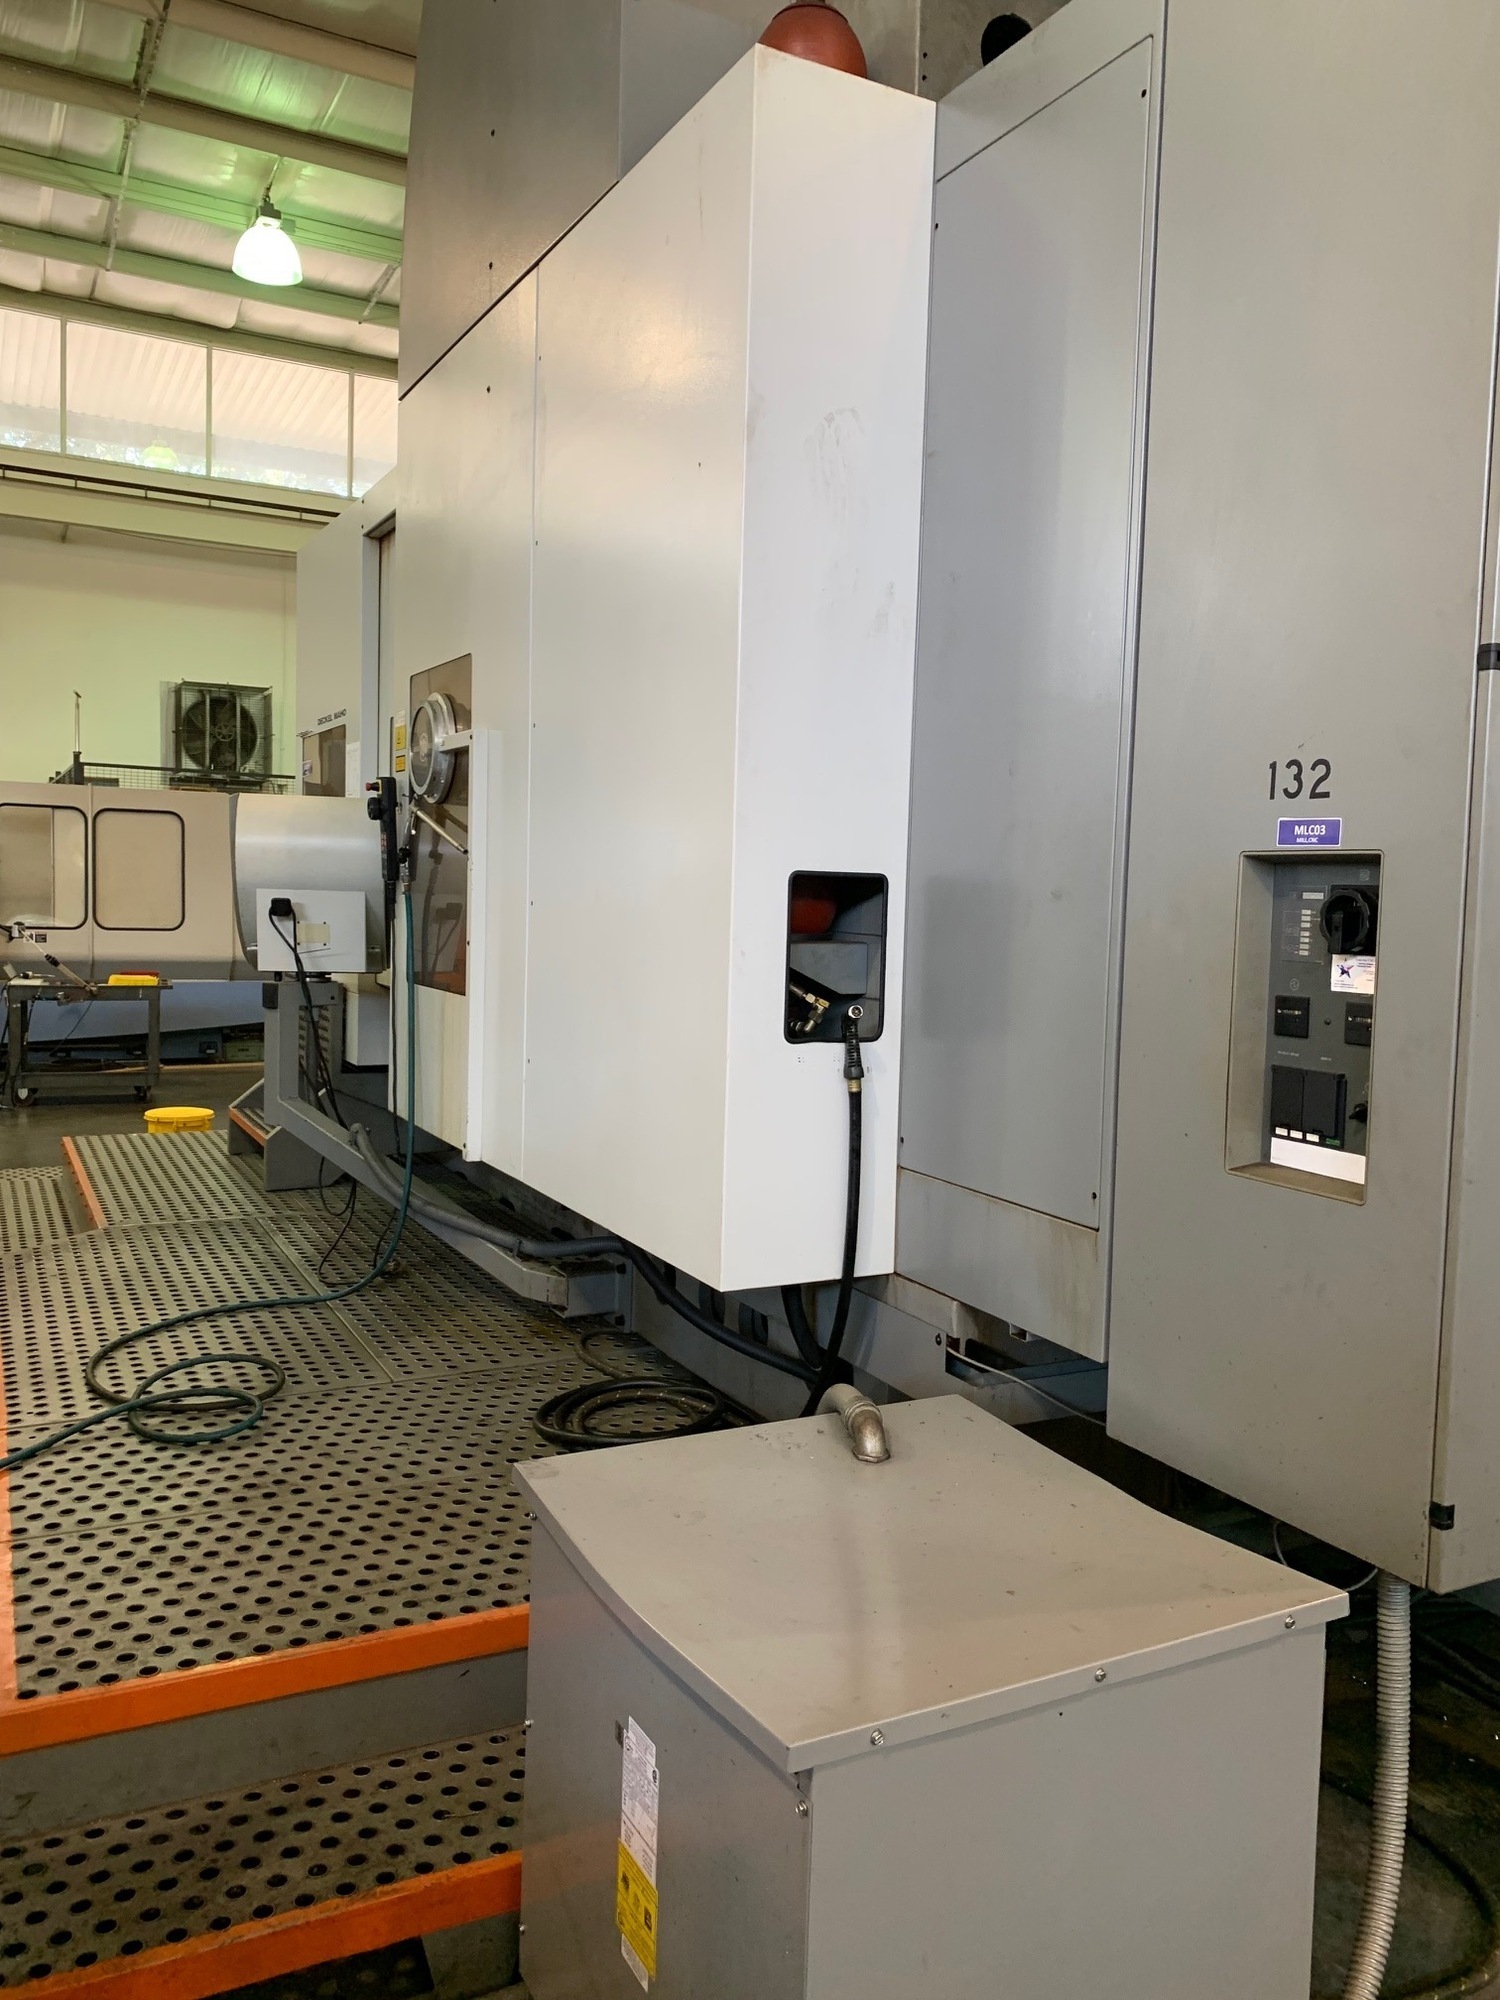 2001 DECKEL MAHO DMU 200 P Vertical Machining Centers (5-Axis or More) | Silverlight CNC, Inc